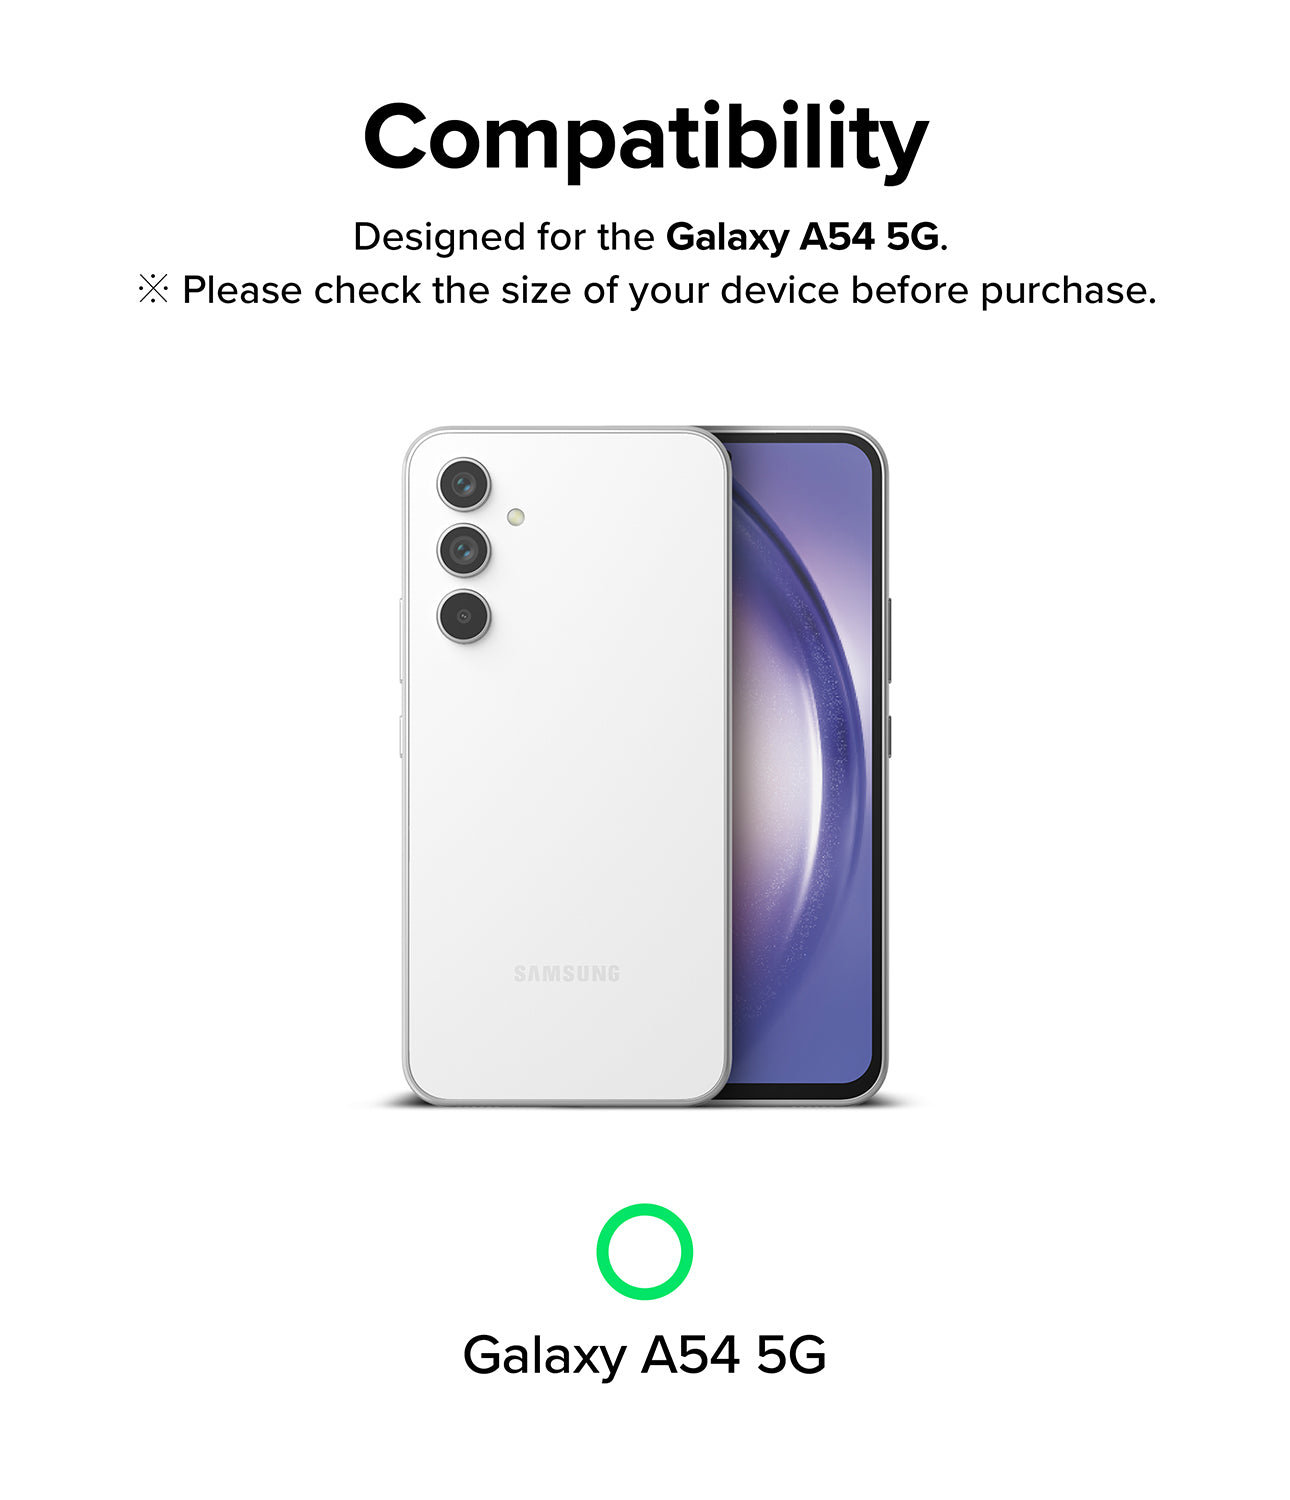 Designed for the Galaxy A54 5G